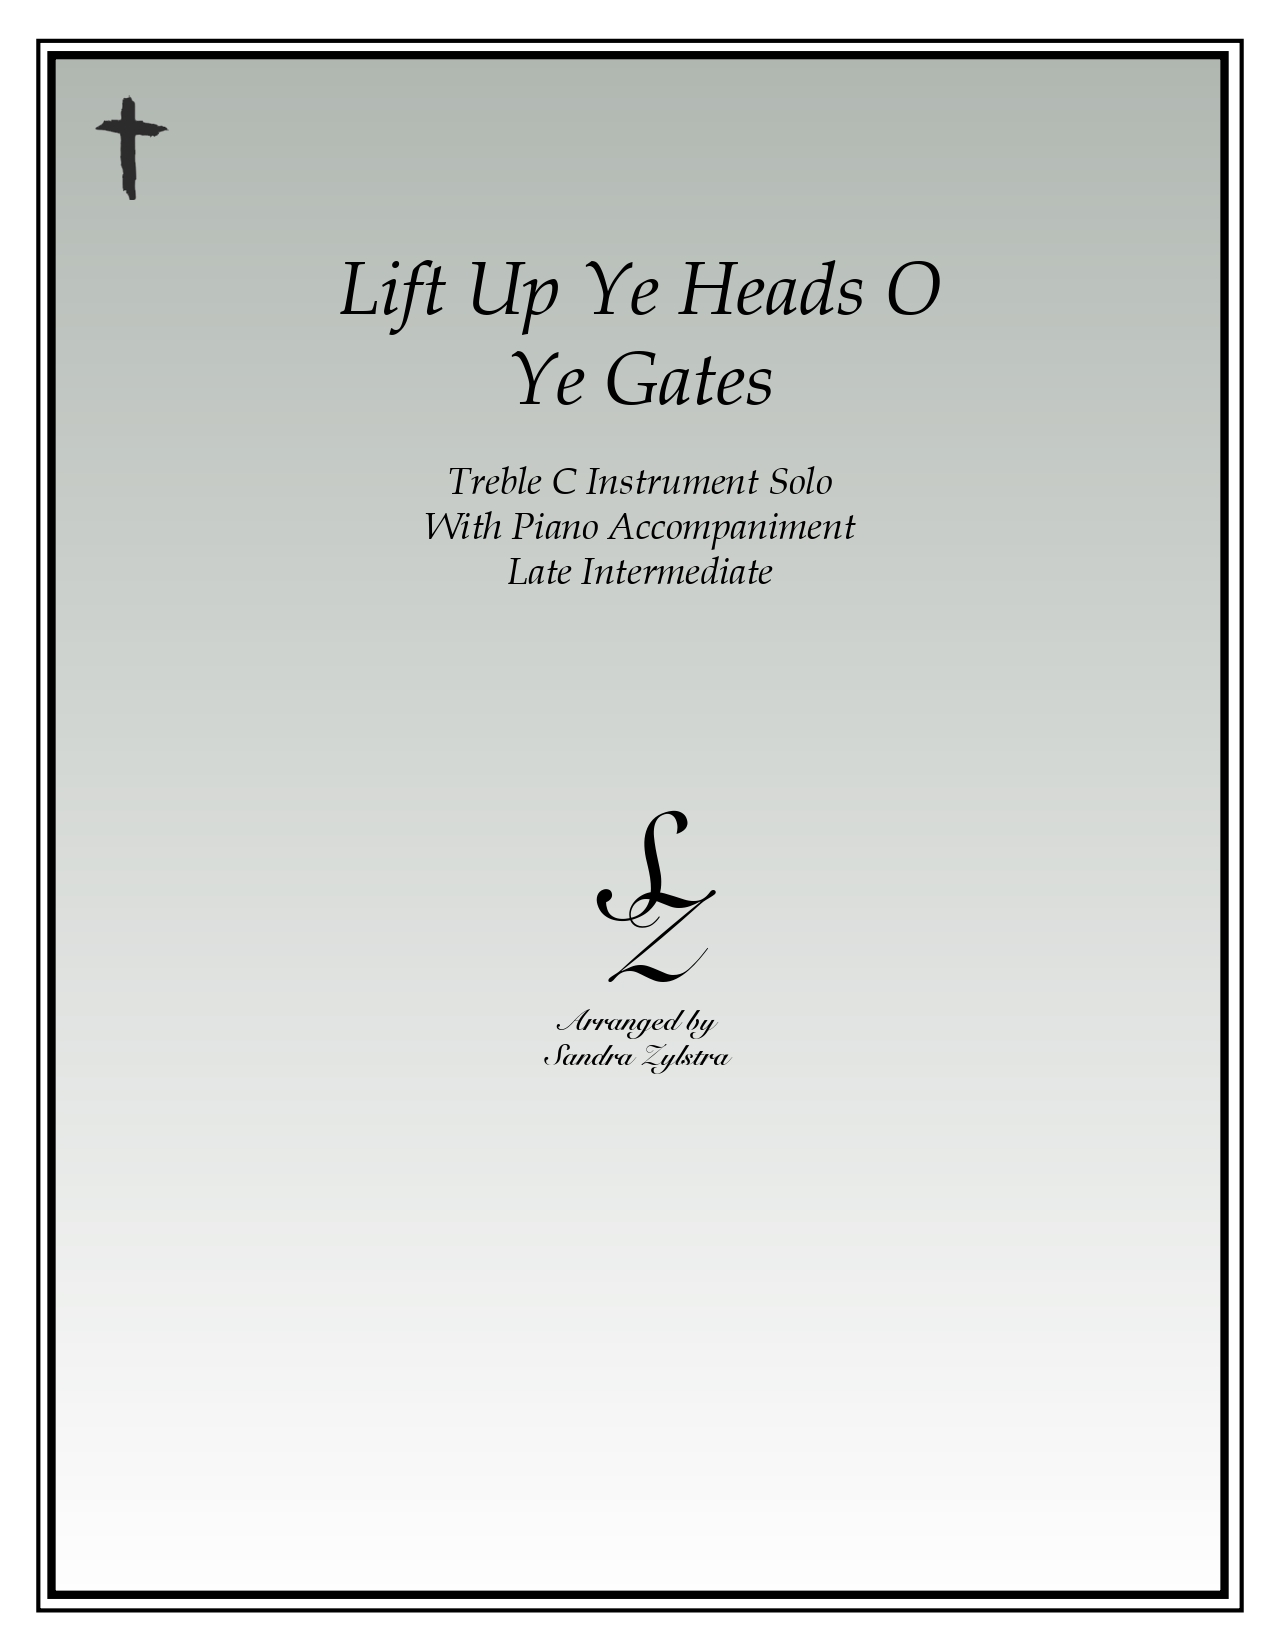 Lift Up Ye Heads O Ye Gates treble C instrument solo part cover page 00011